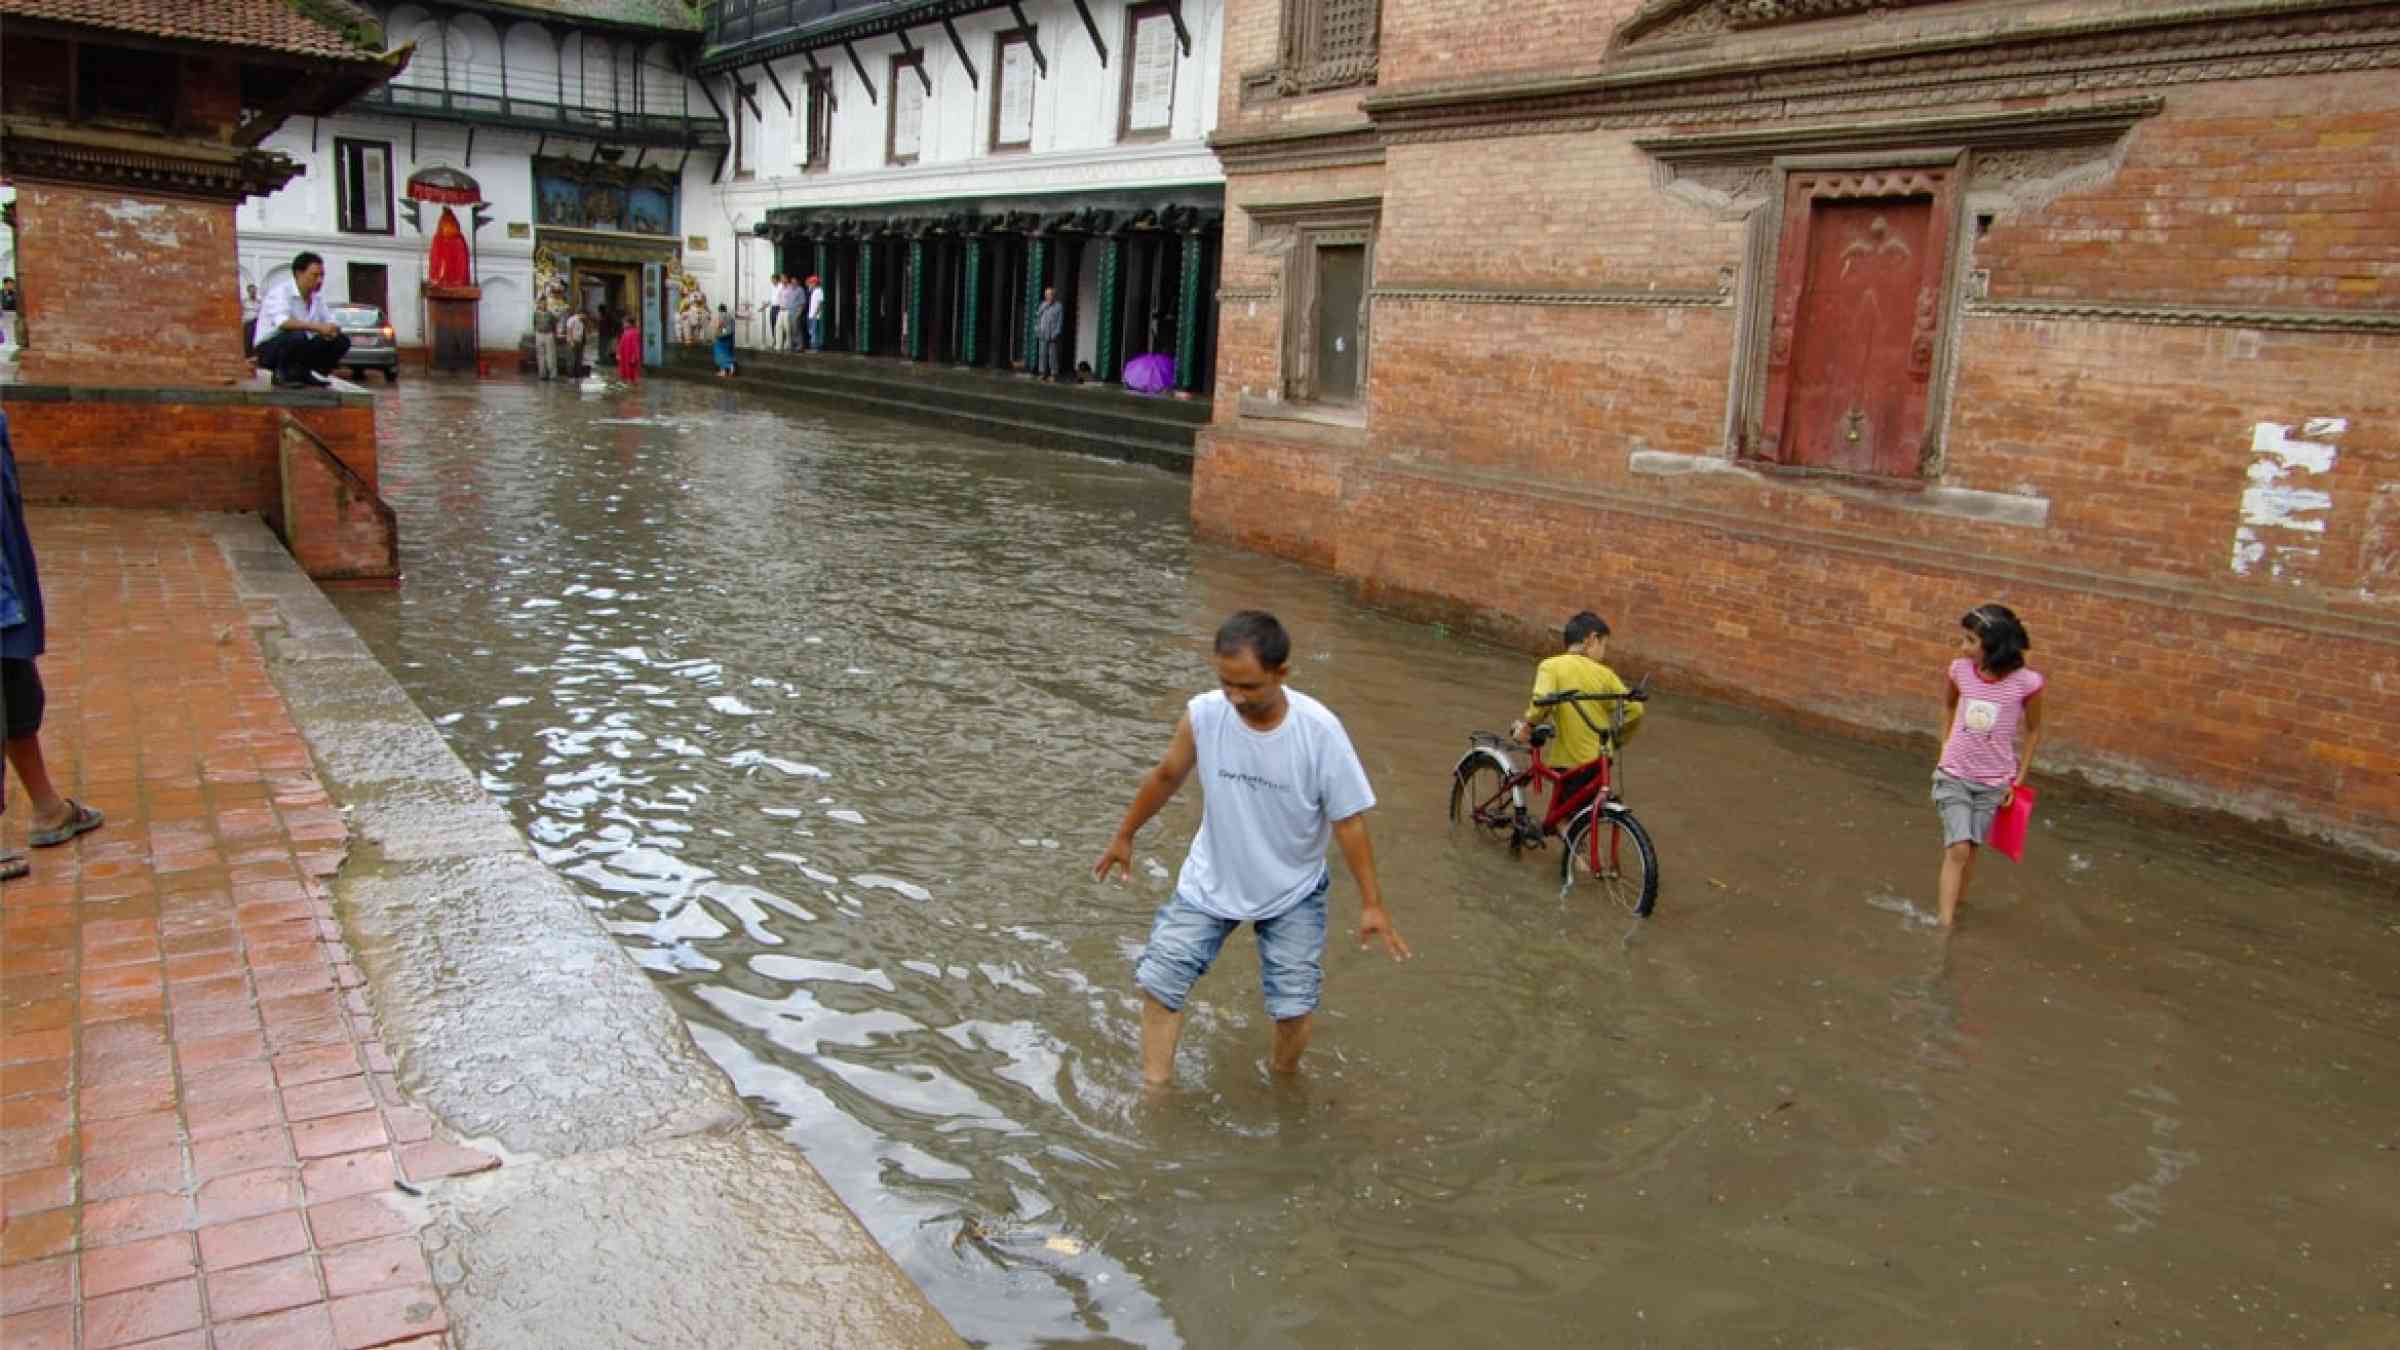 Kathmandu main square flooded with water after heavy monsoon rain (2012)